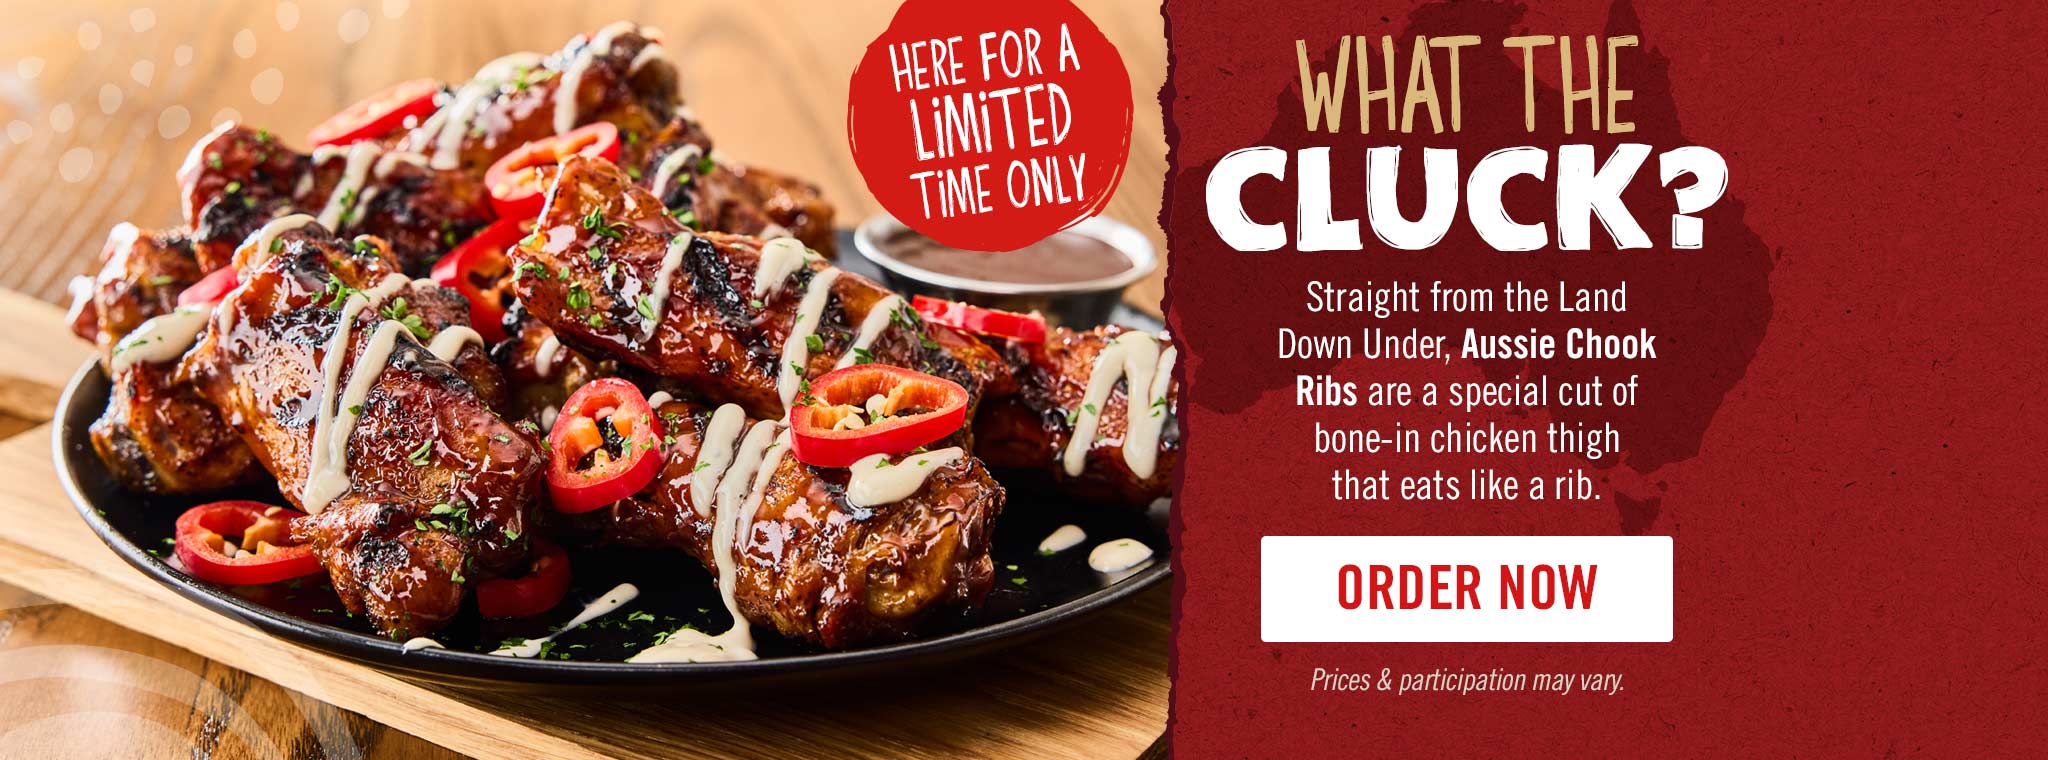 What the cluck? Straight from the Land Down Under, Aussie Chook Ribs are a special cut of bone-in chicken thigh that eats like a rib.